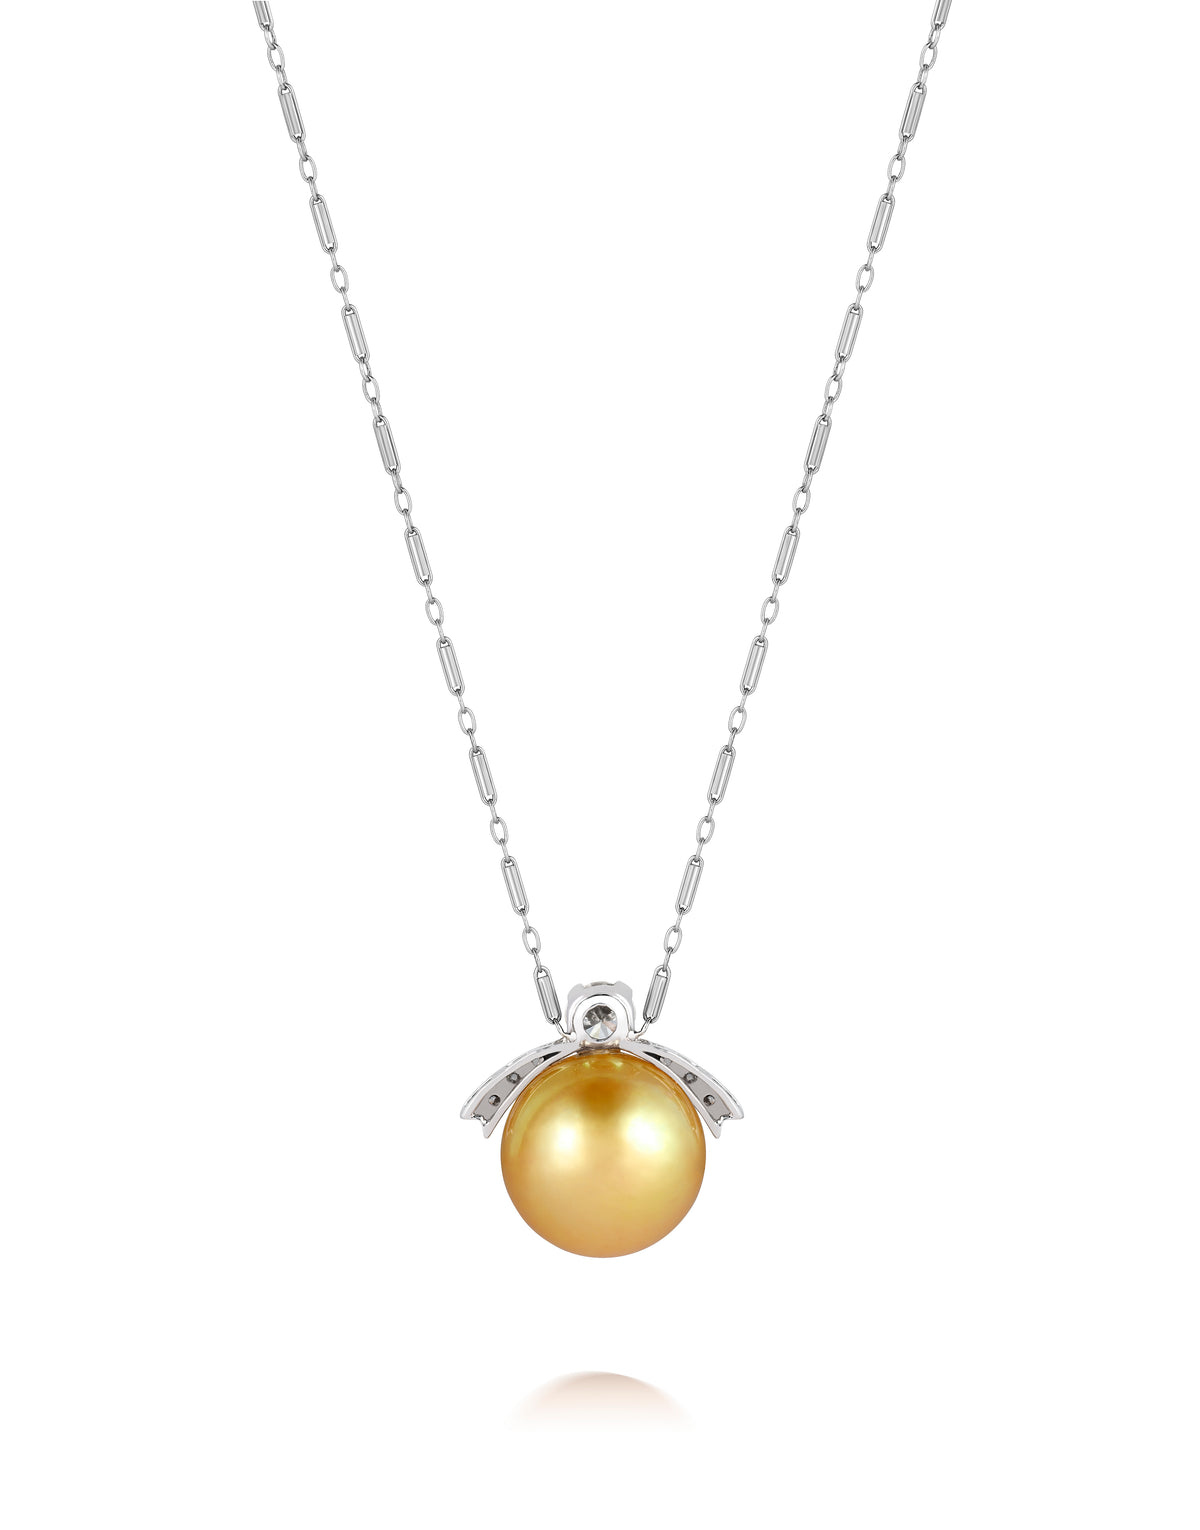 BESPOKE GOLDEN SOUTH SEA PEARL NECKLACE